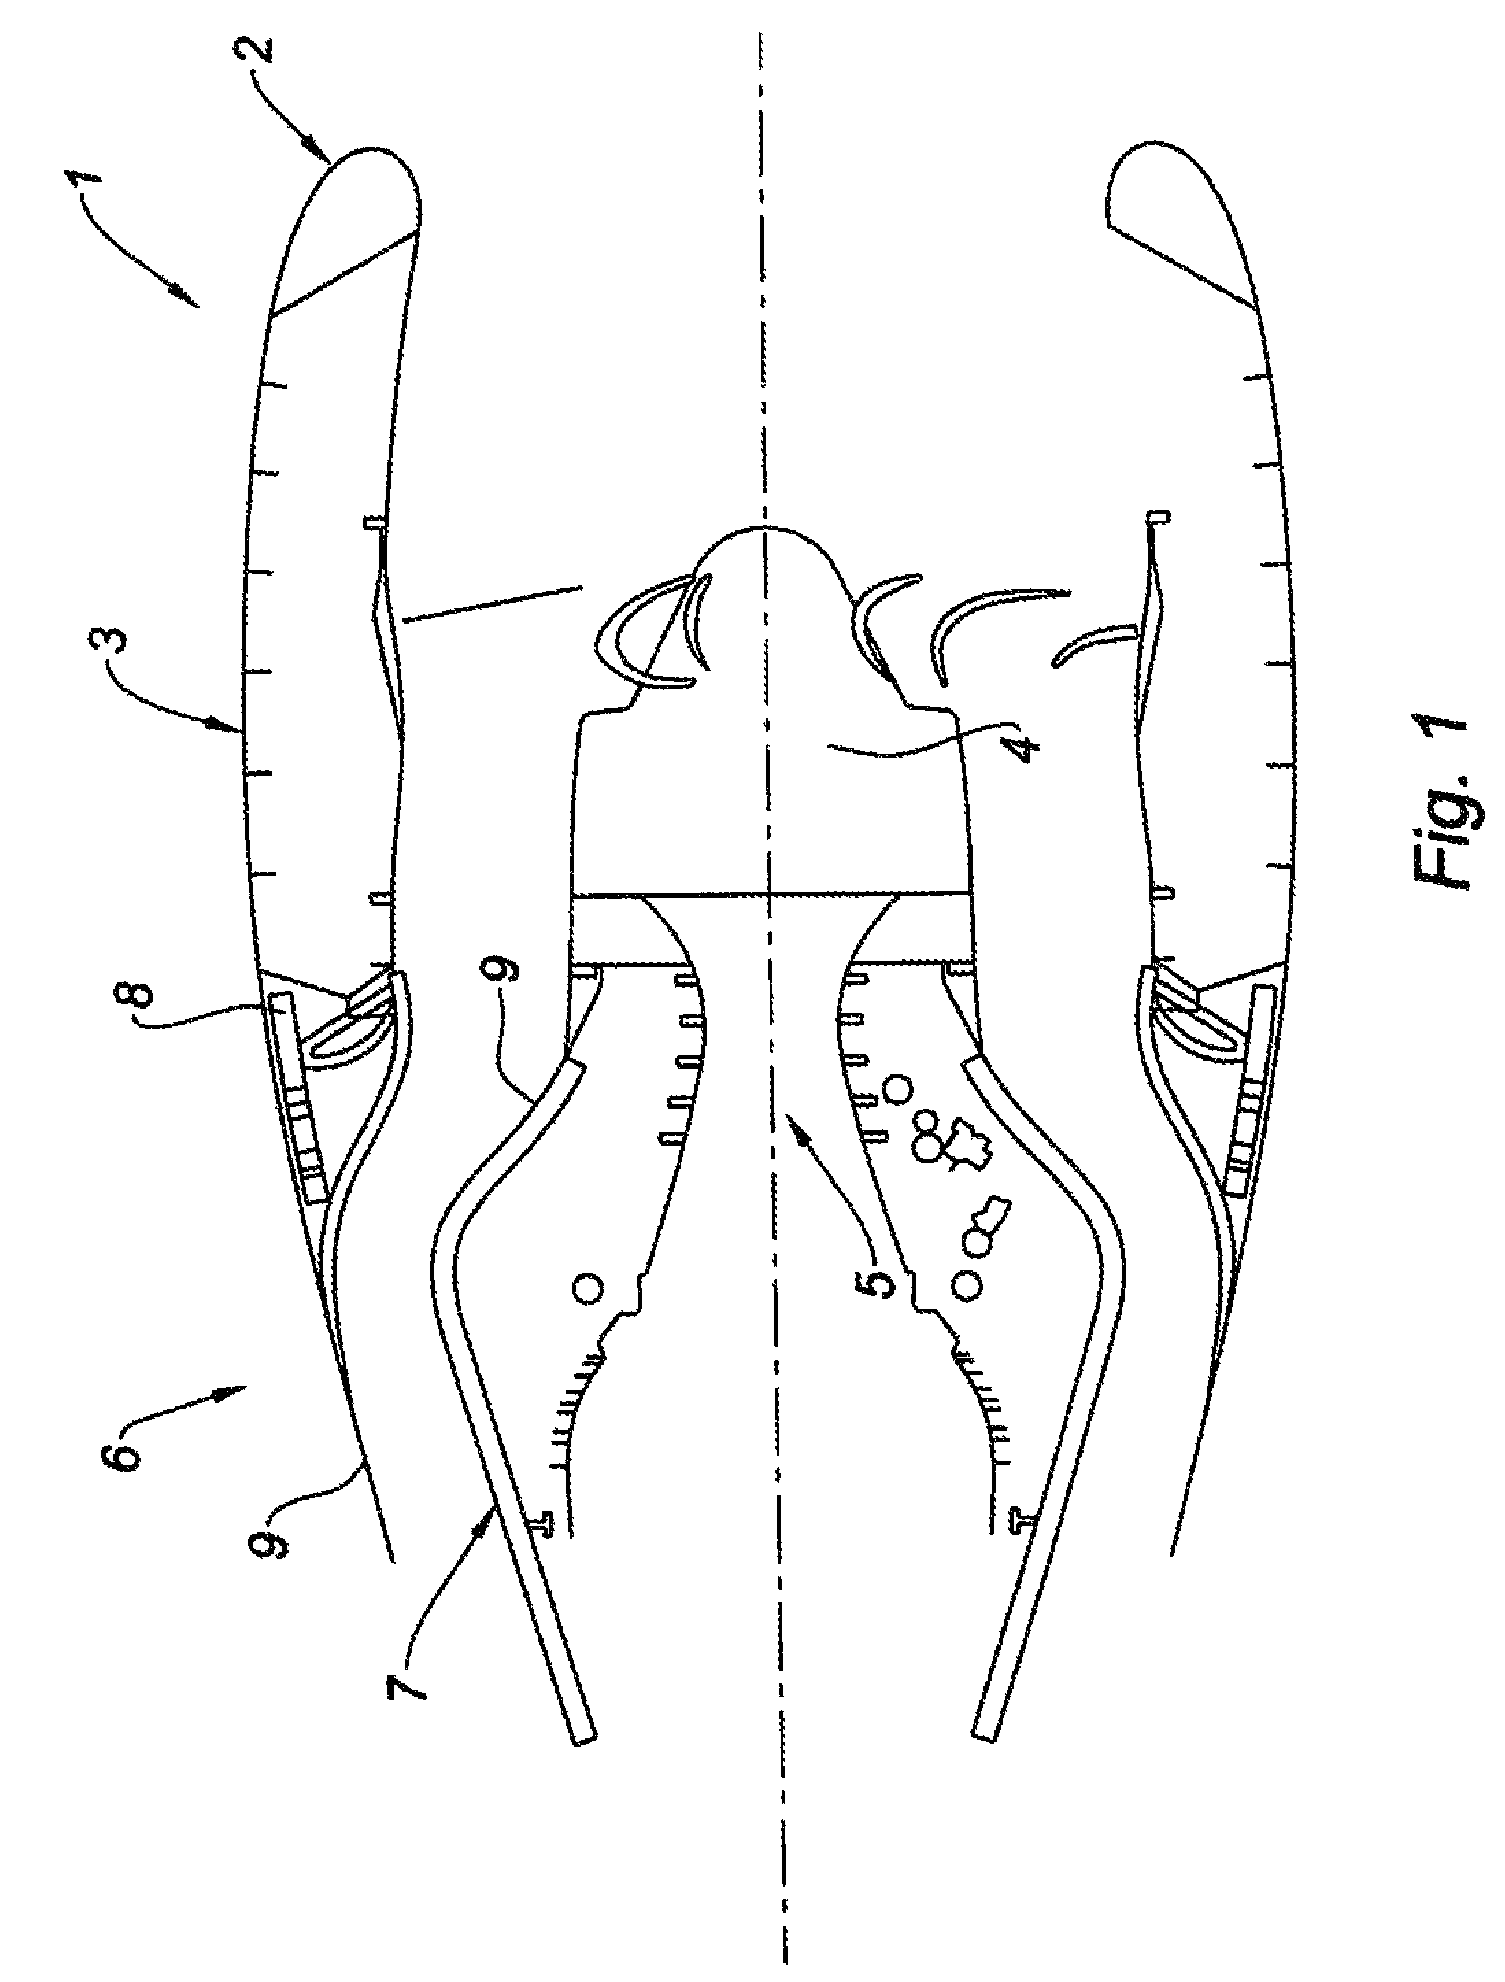 Method for making an acoustic panel for the air intake lip of a nacelle